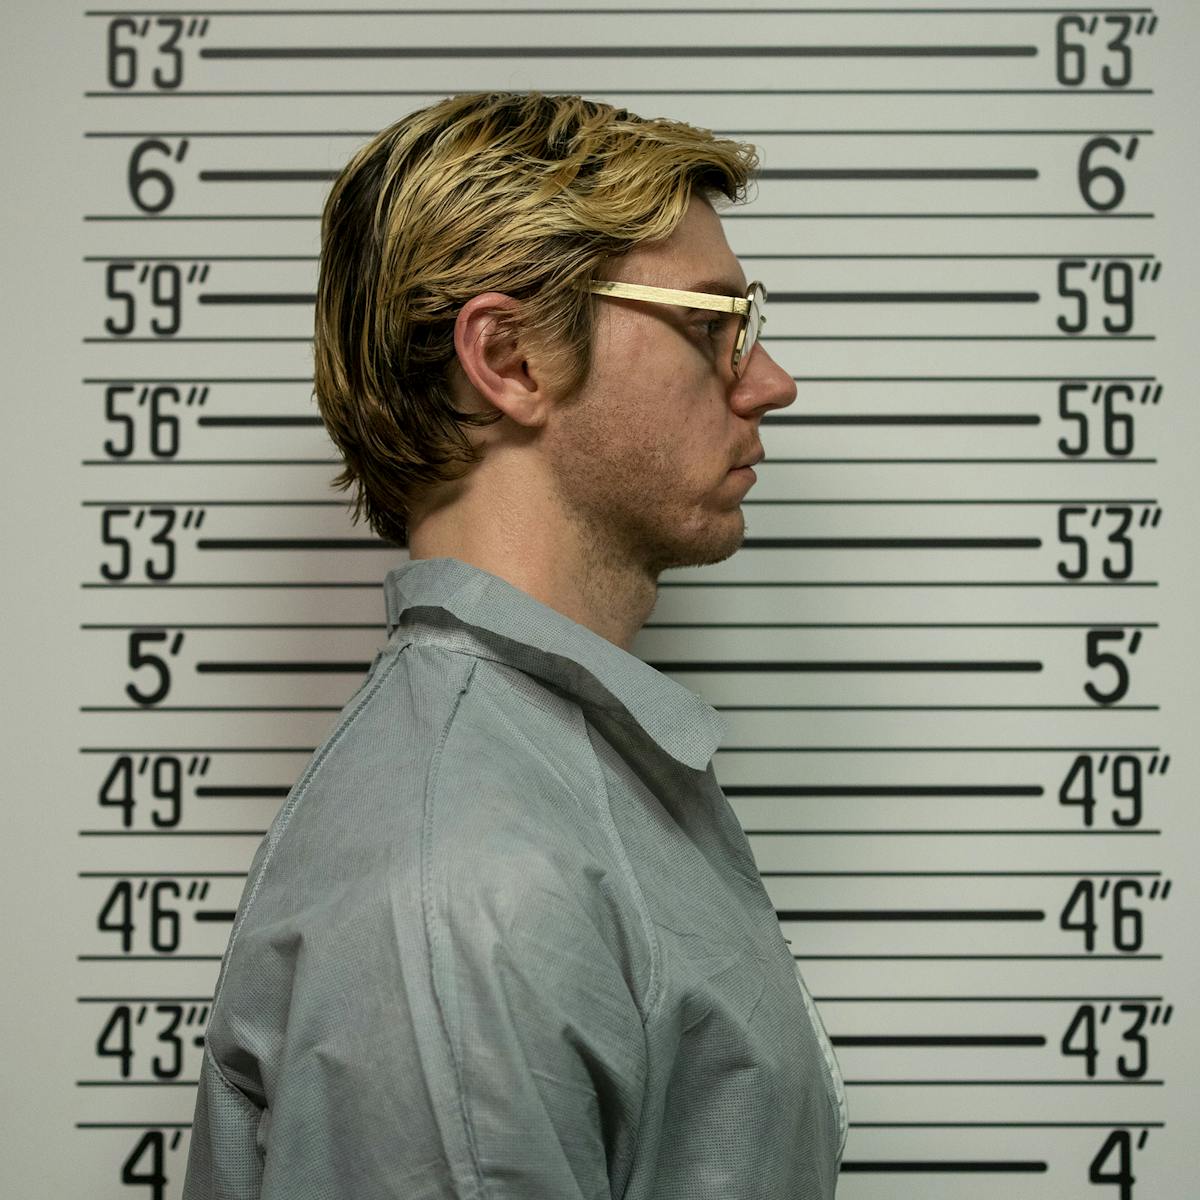 Jeffrey Dahmer (Evan Peters) stands in profile in front of a wall getting his mugshot taken.